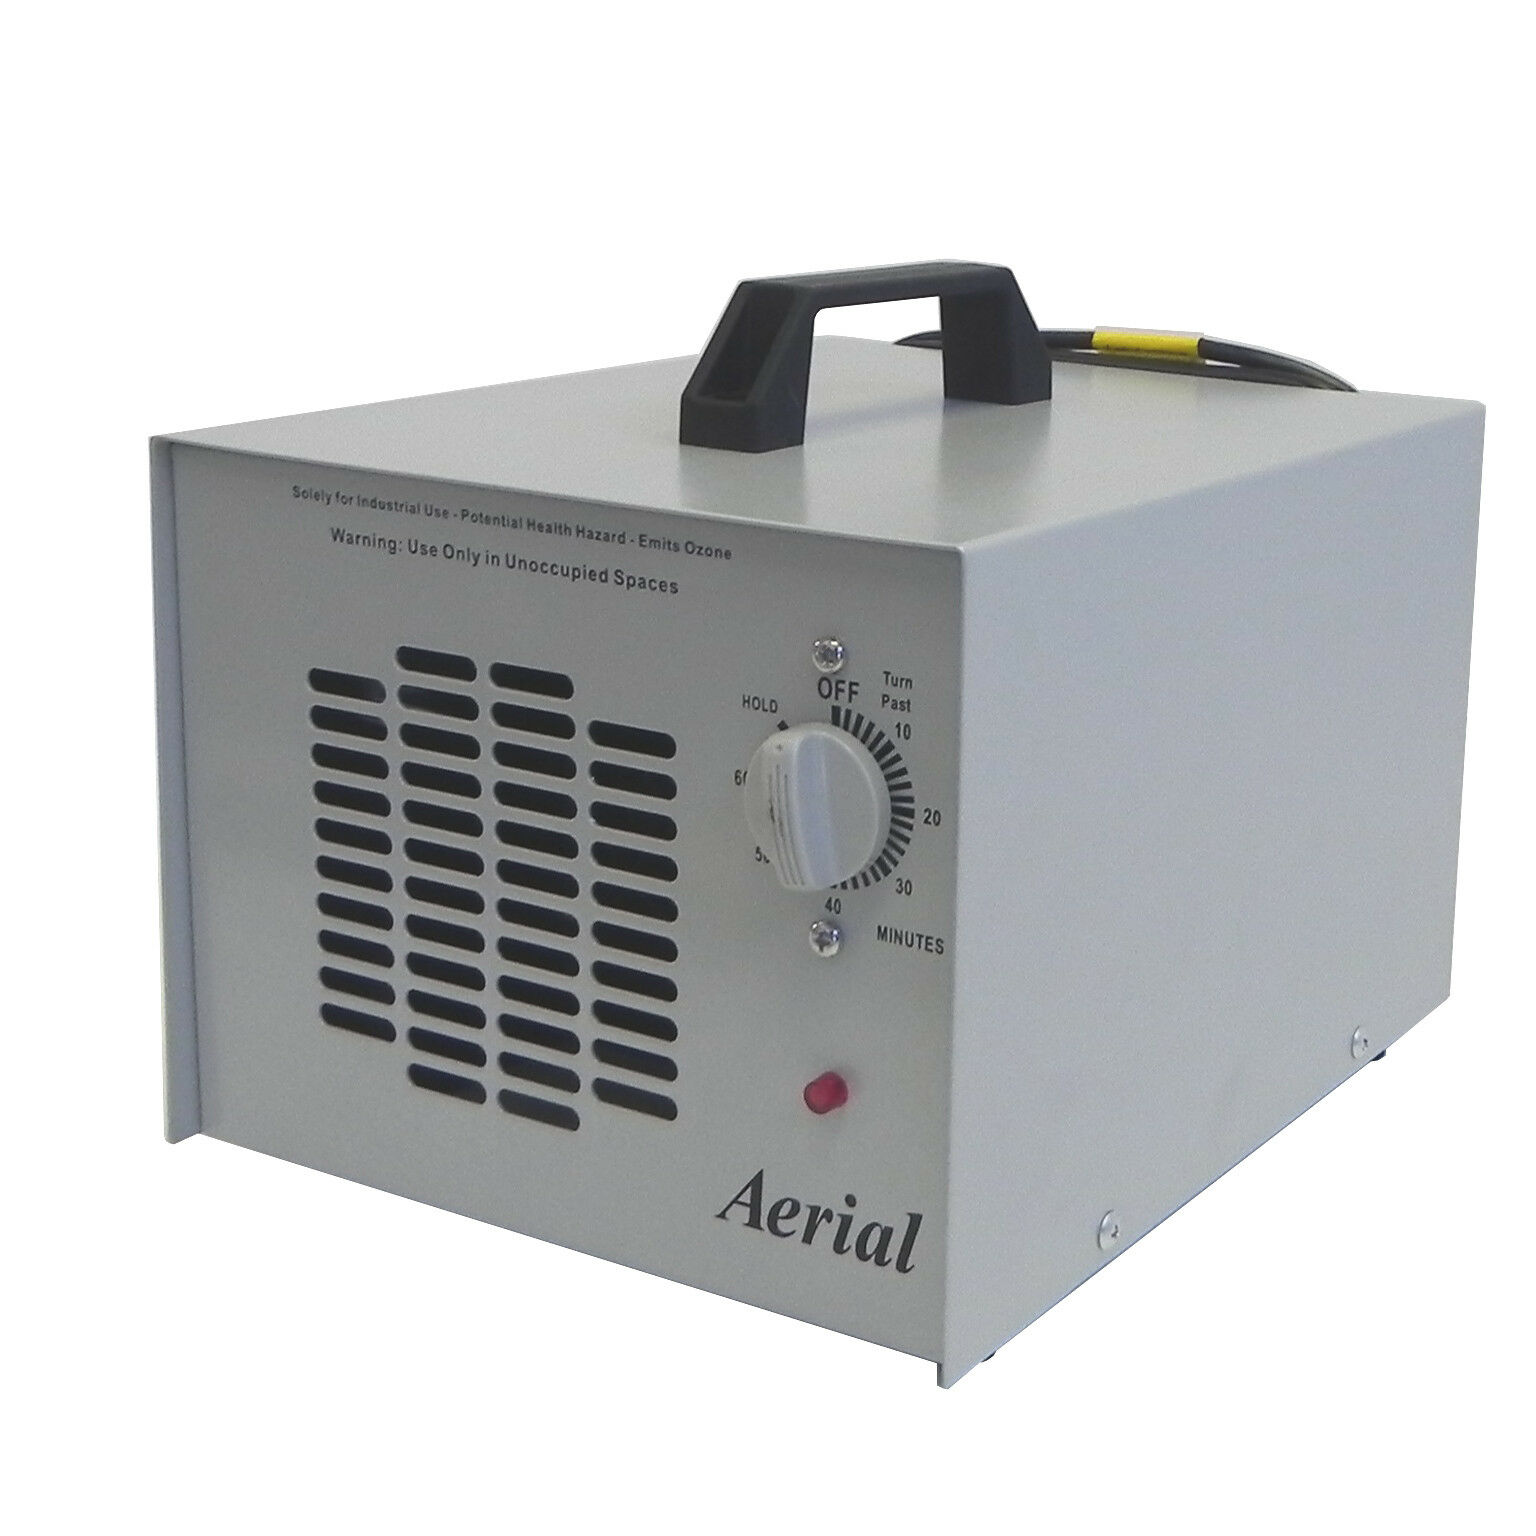 Aerial Commercial Industrial Air Purifier Ozone Generator